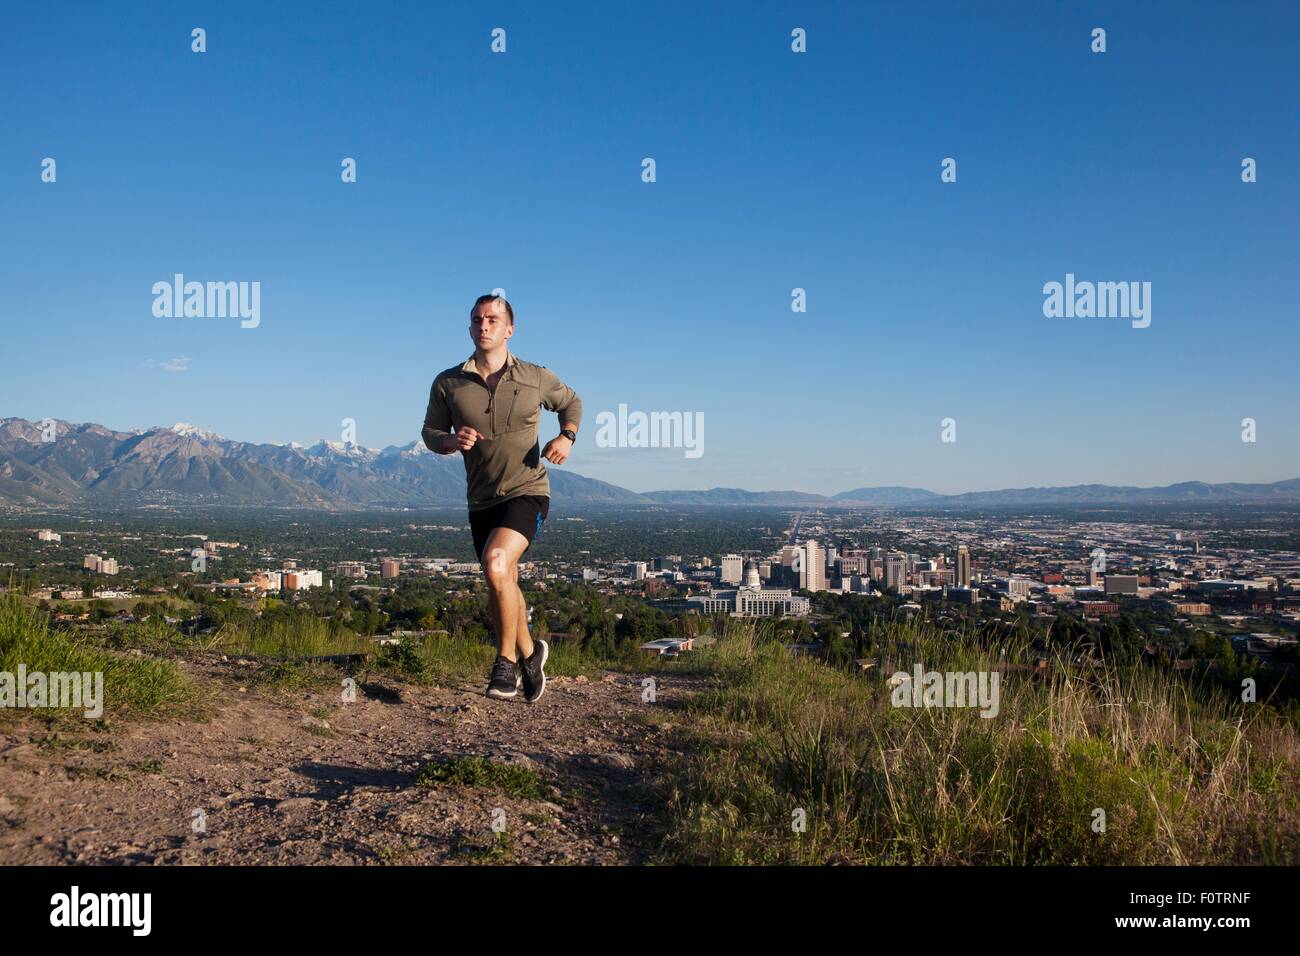 Young male runner running along track above city in valley Stock Photo